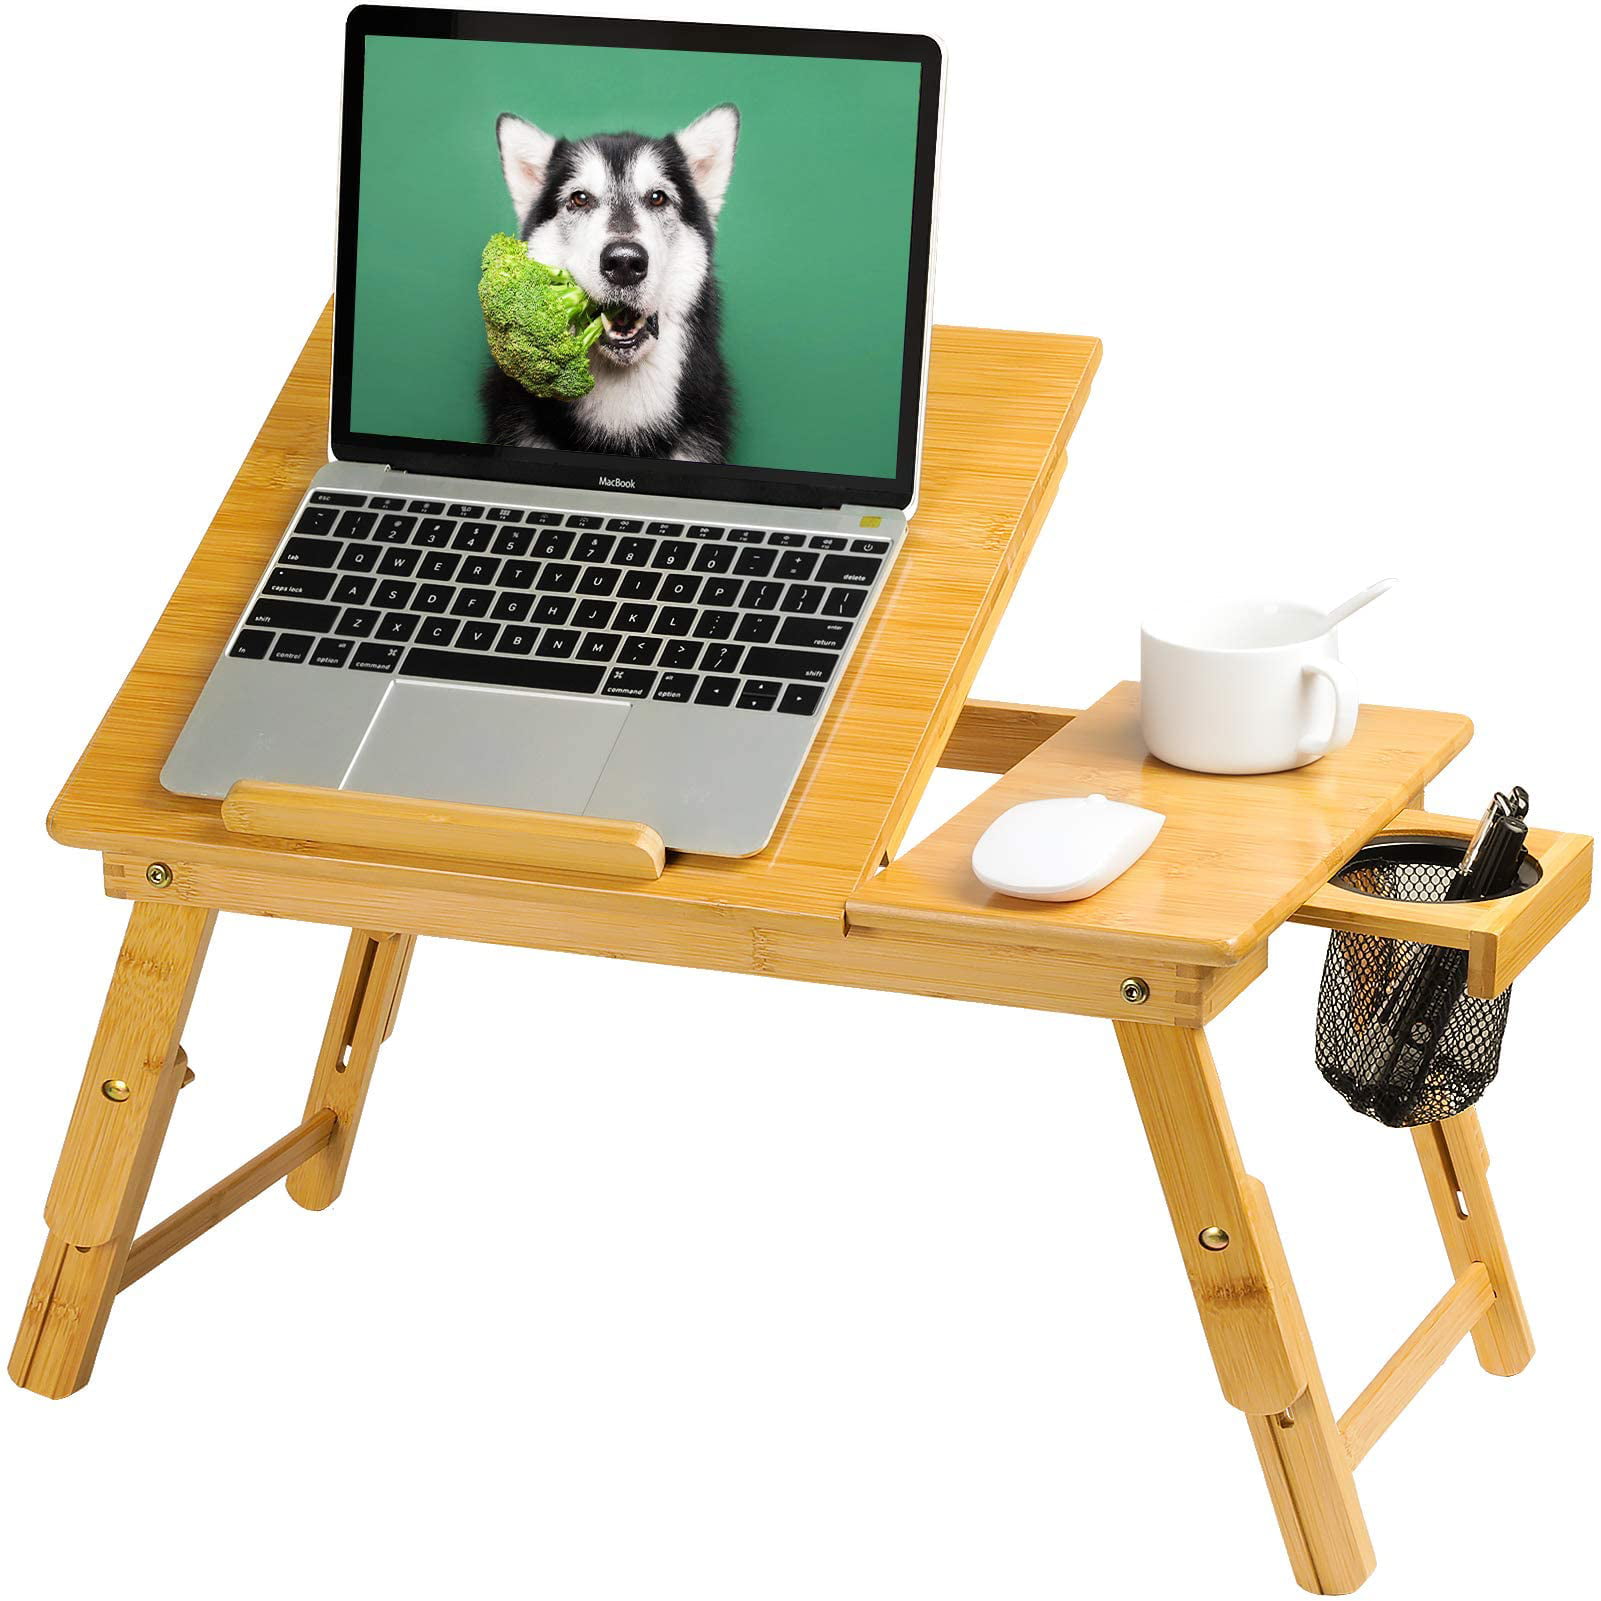 Adjustable Folding Lap Desk Bamboo Laptop Breakfast Tray Natural Bed Table Stand 